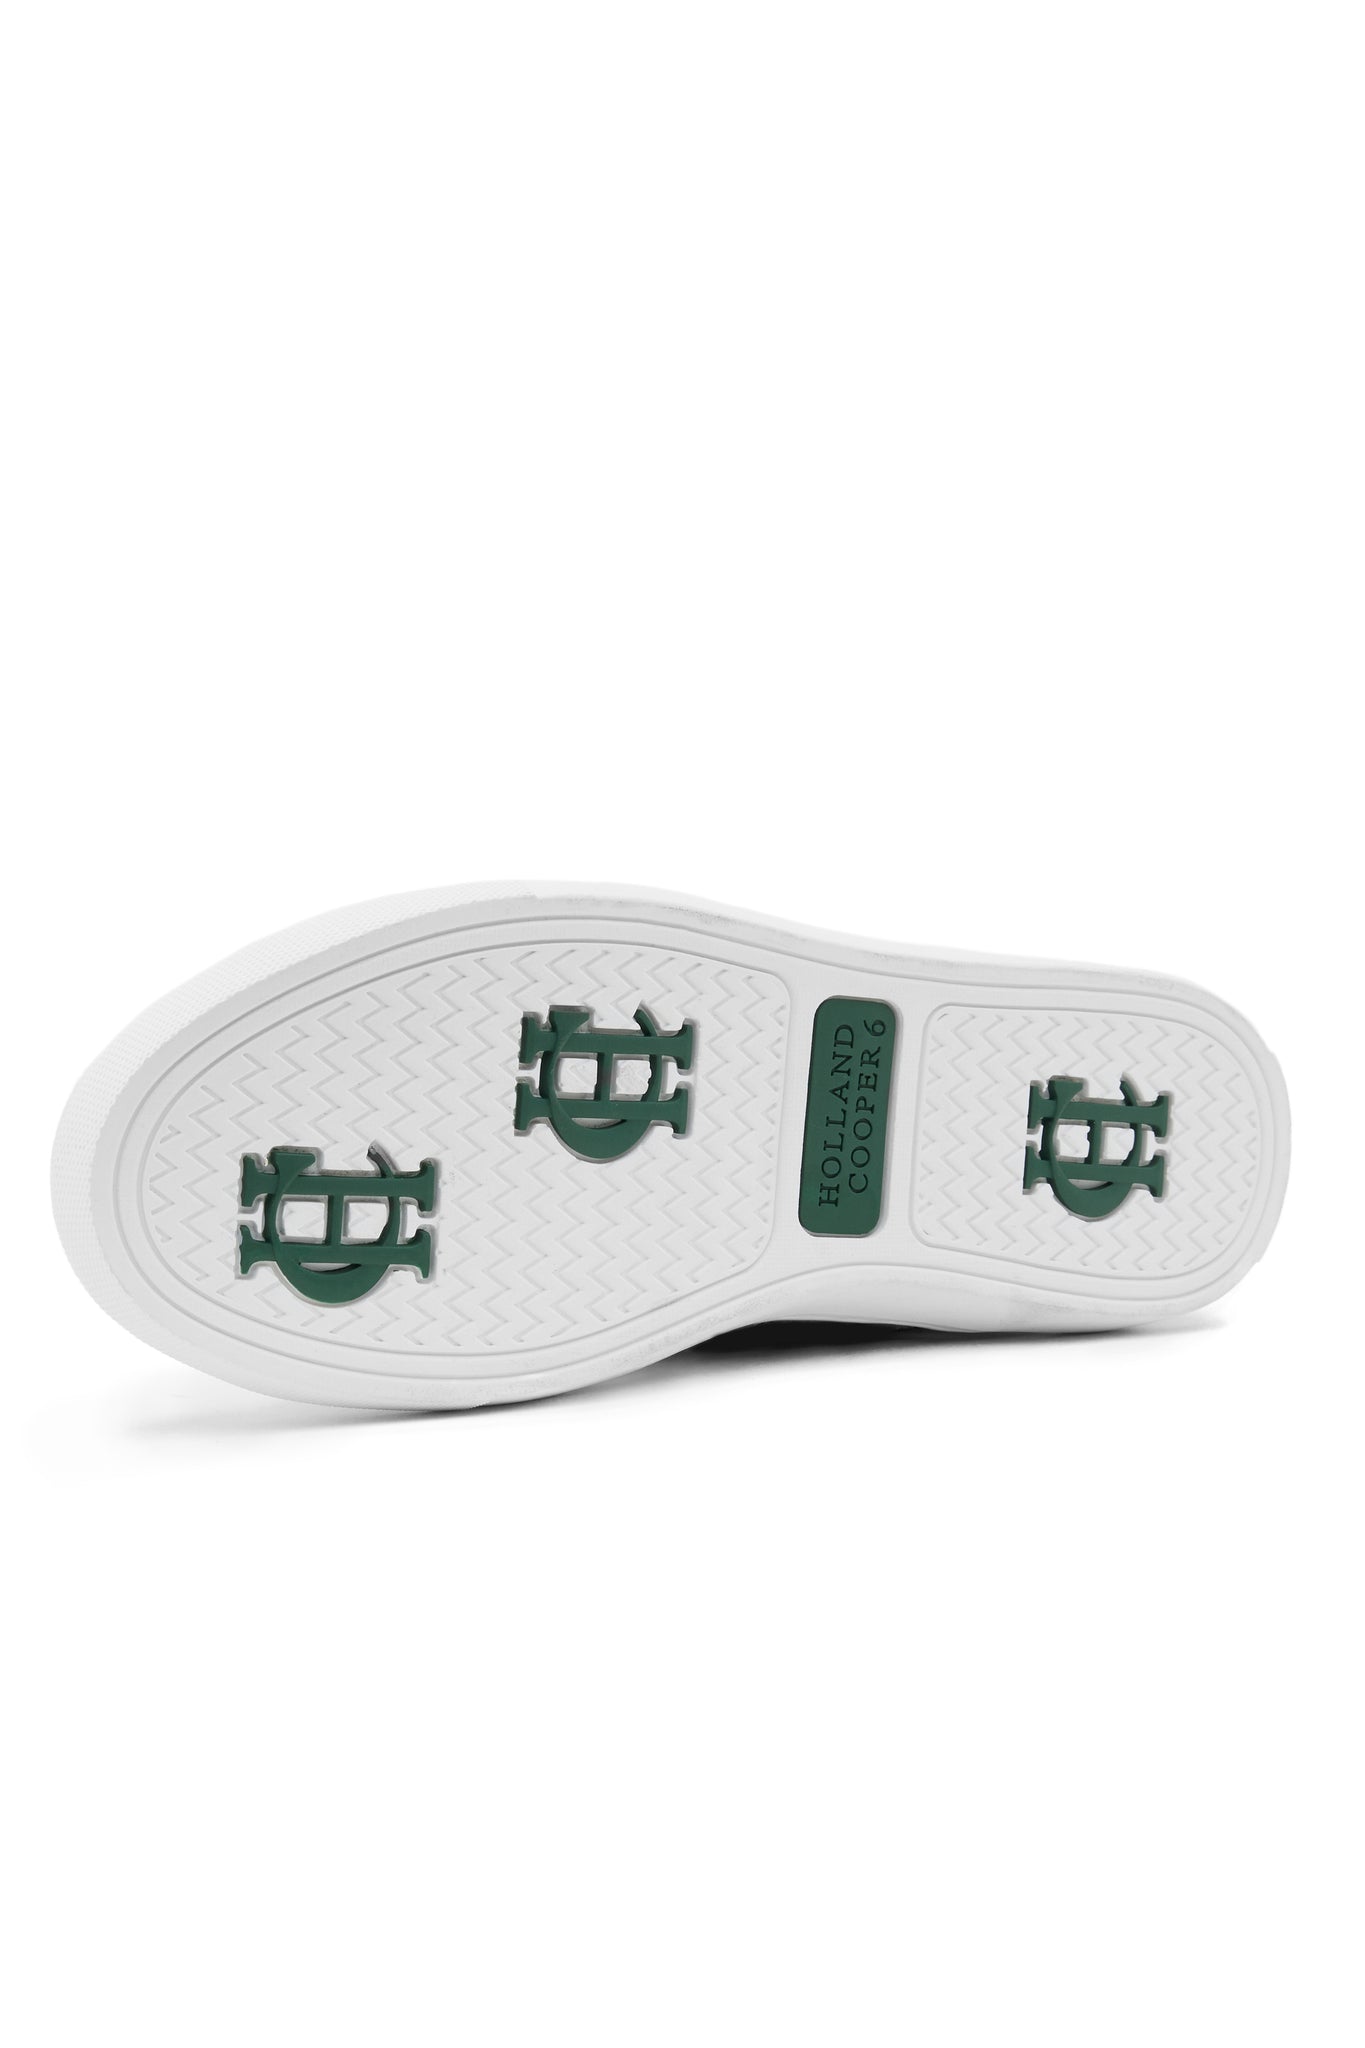 White leather sole with dark green branding